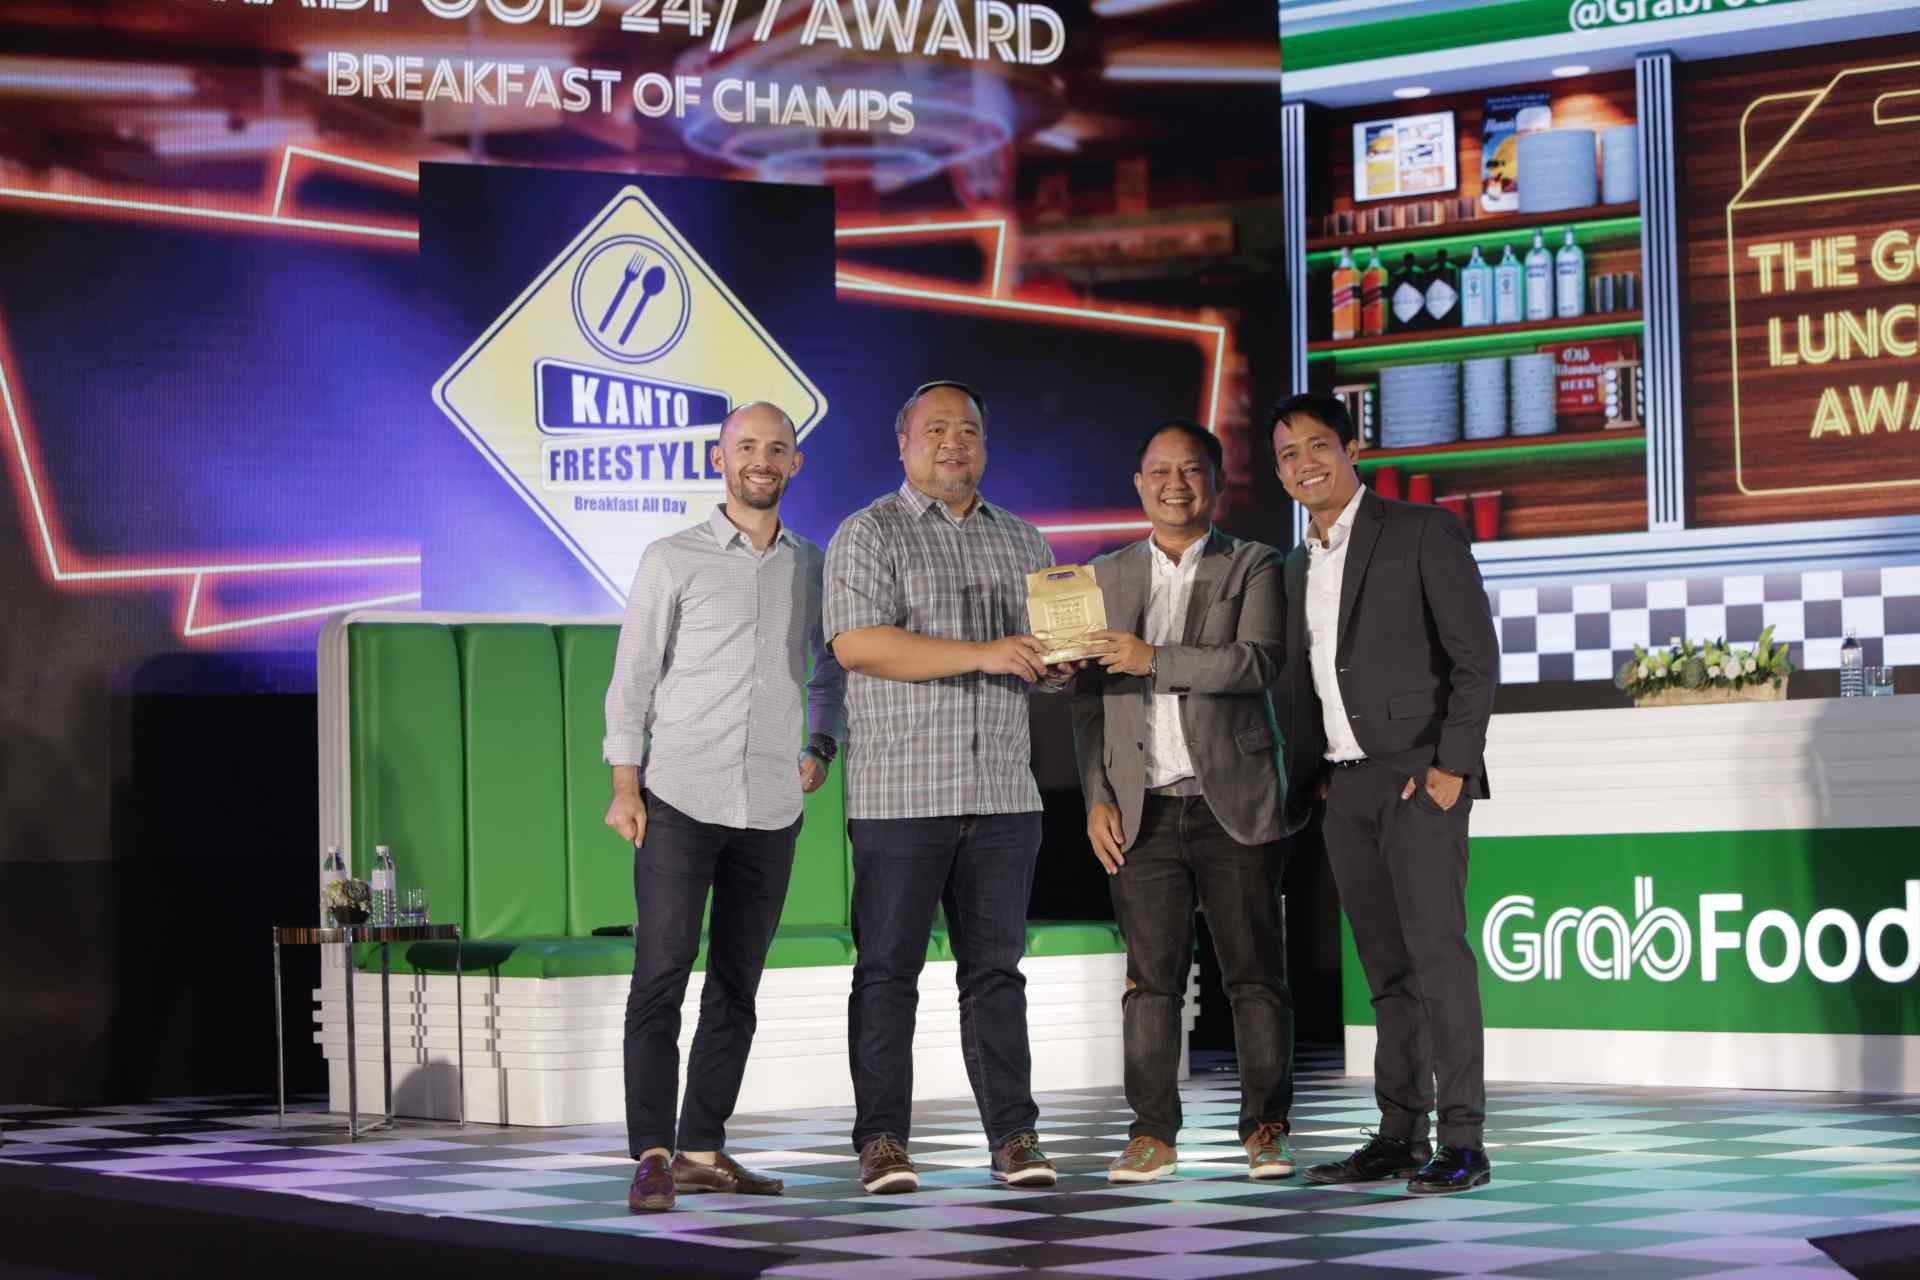 PARTNER FOR THE FUTURE. For Paul Cruz, Kanto Freestyle's marketing and social media manager, GrabFood delivery service reach is now an important factor in their business expansion. Photo by Grab PH 